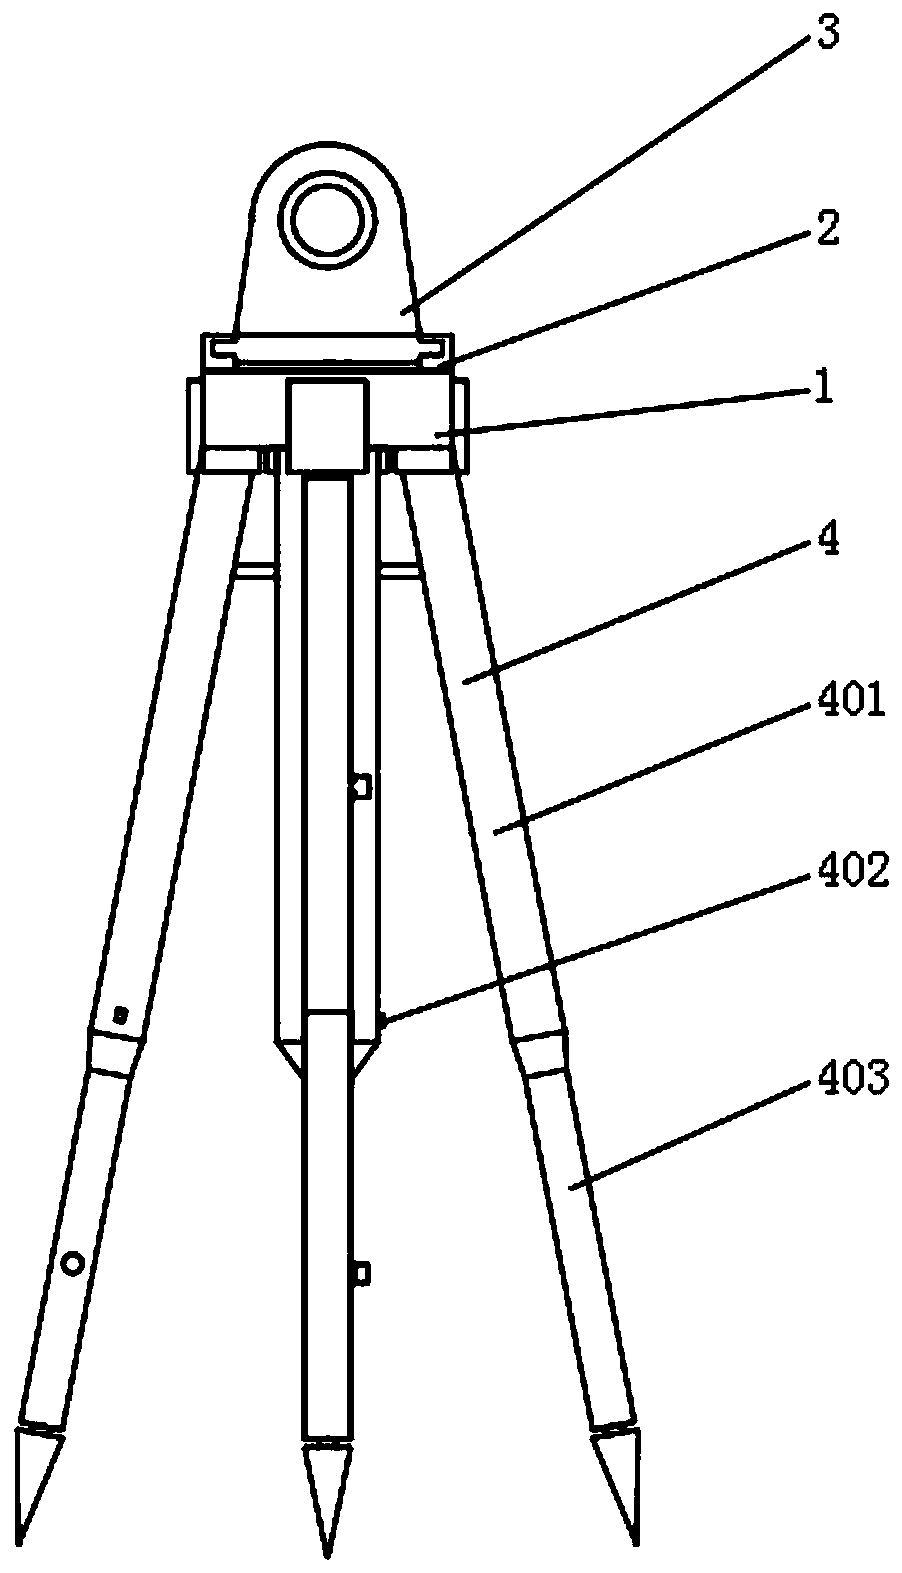 Portable positioning device for engineering surveying and mapping